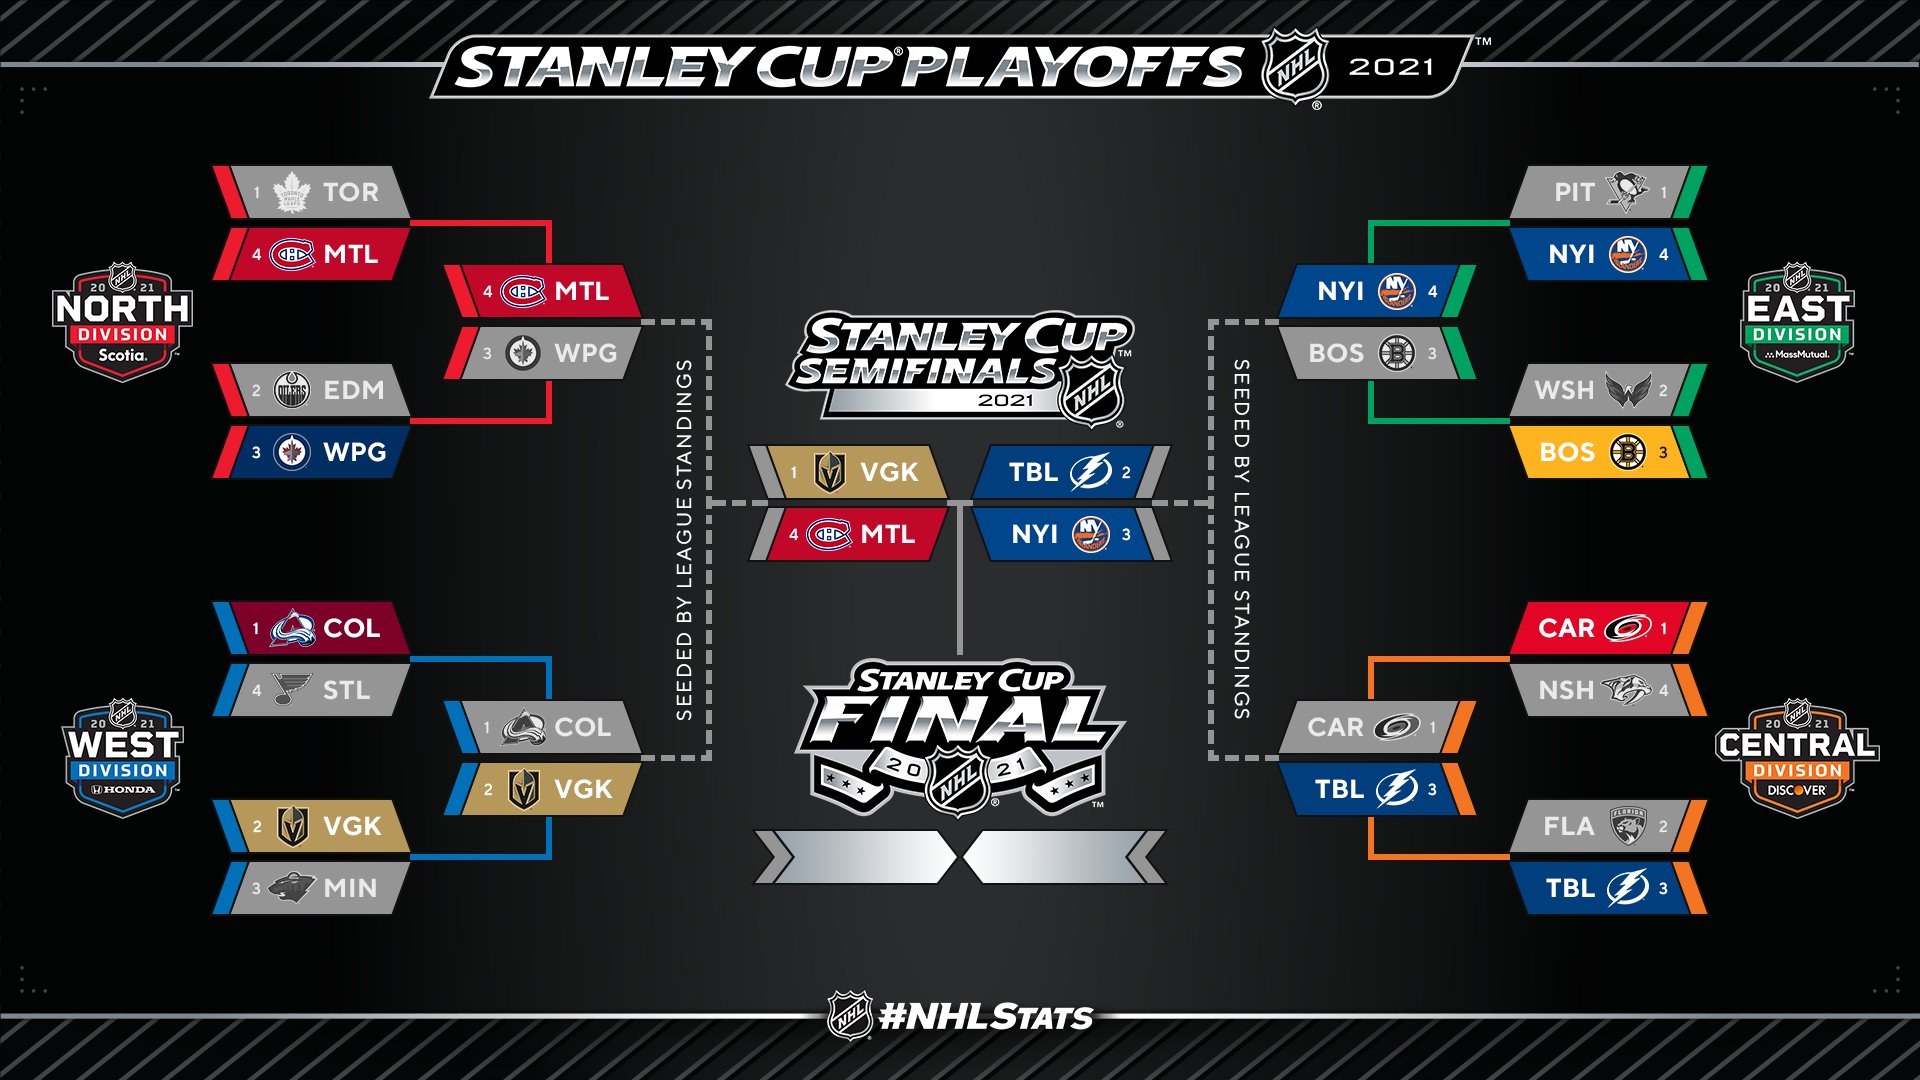 2021 Stanley Cup Playoffs Semifinals matchups, schedule and TV info